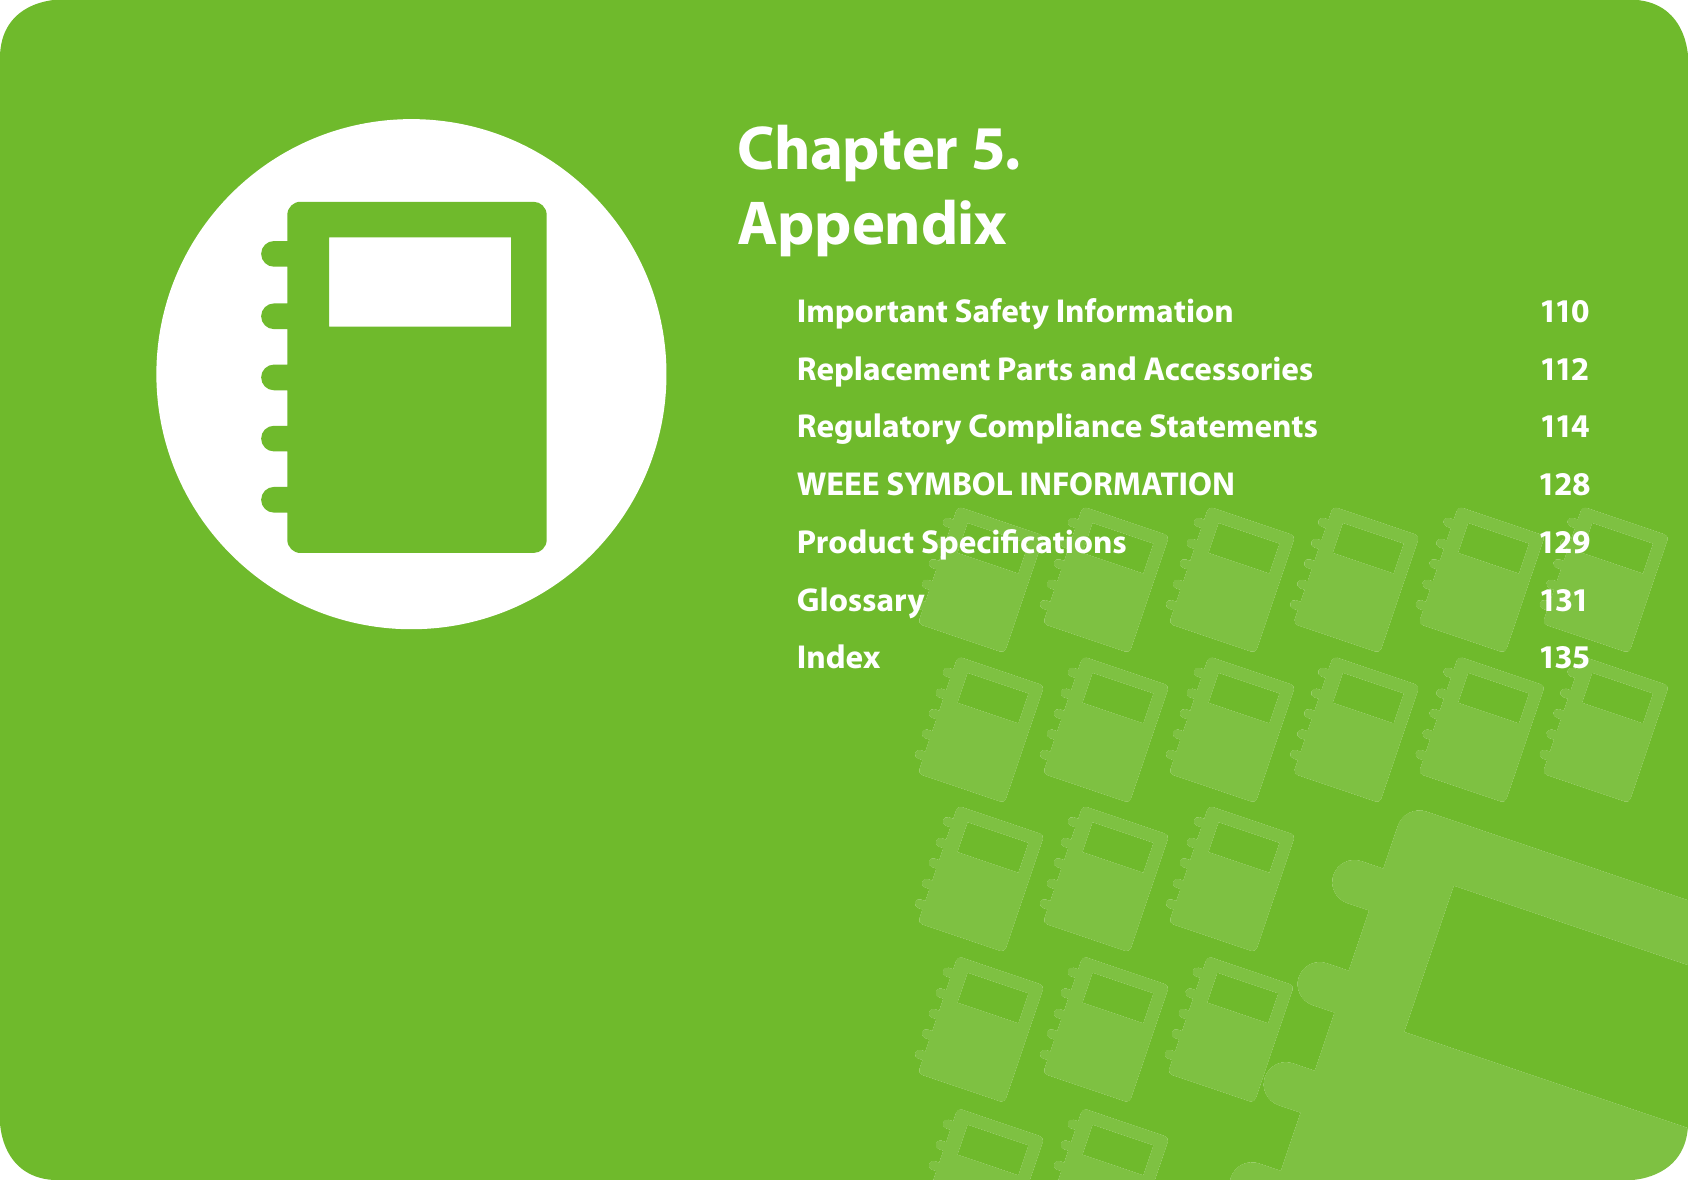 Chapter 5. AppendixImportant Safety Information 110Replacement Parts and Accessories 112Regulatory Compliance Statements 114WEEE SYMBOL INFORMATION 128Product Specications 129Glossary 131Index 135